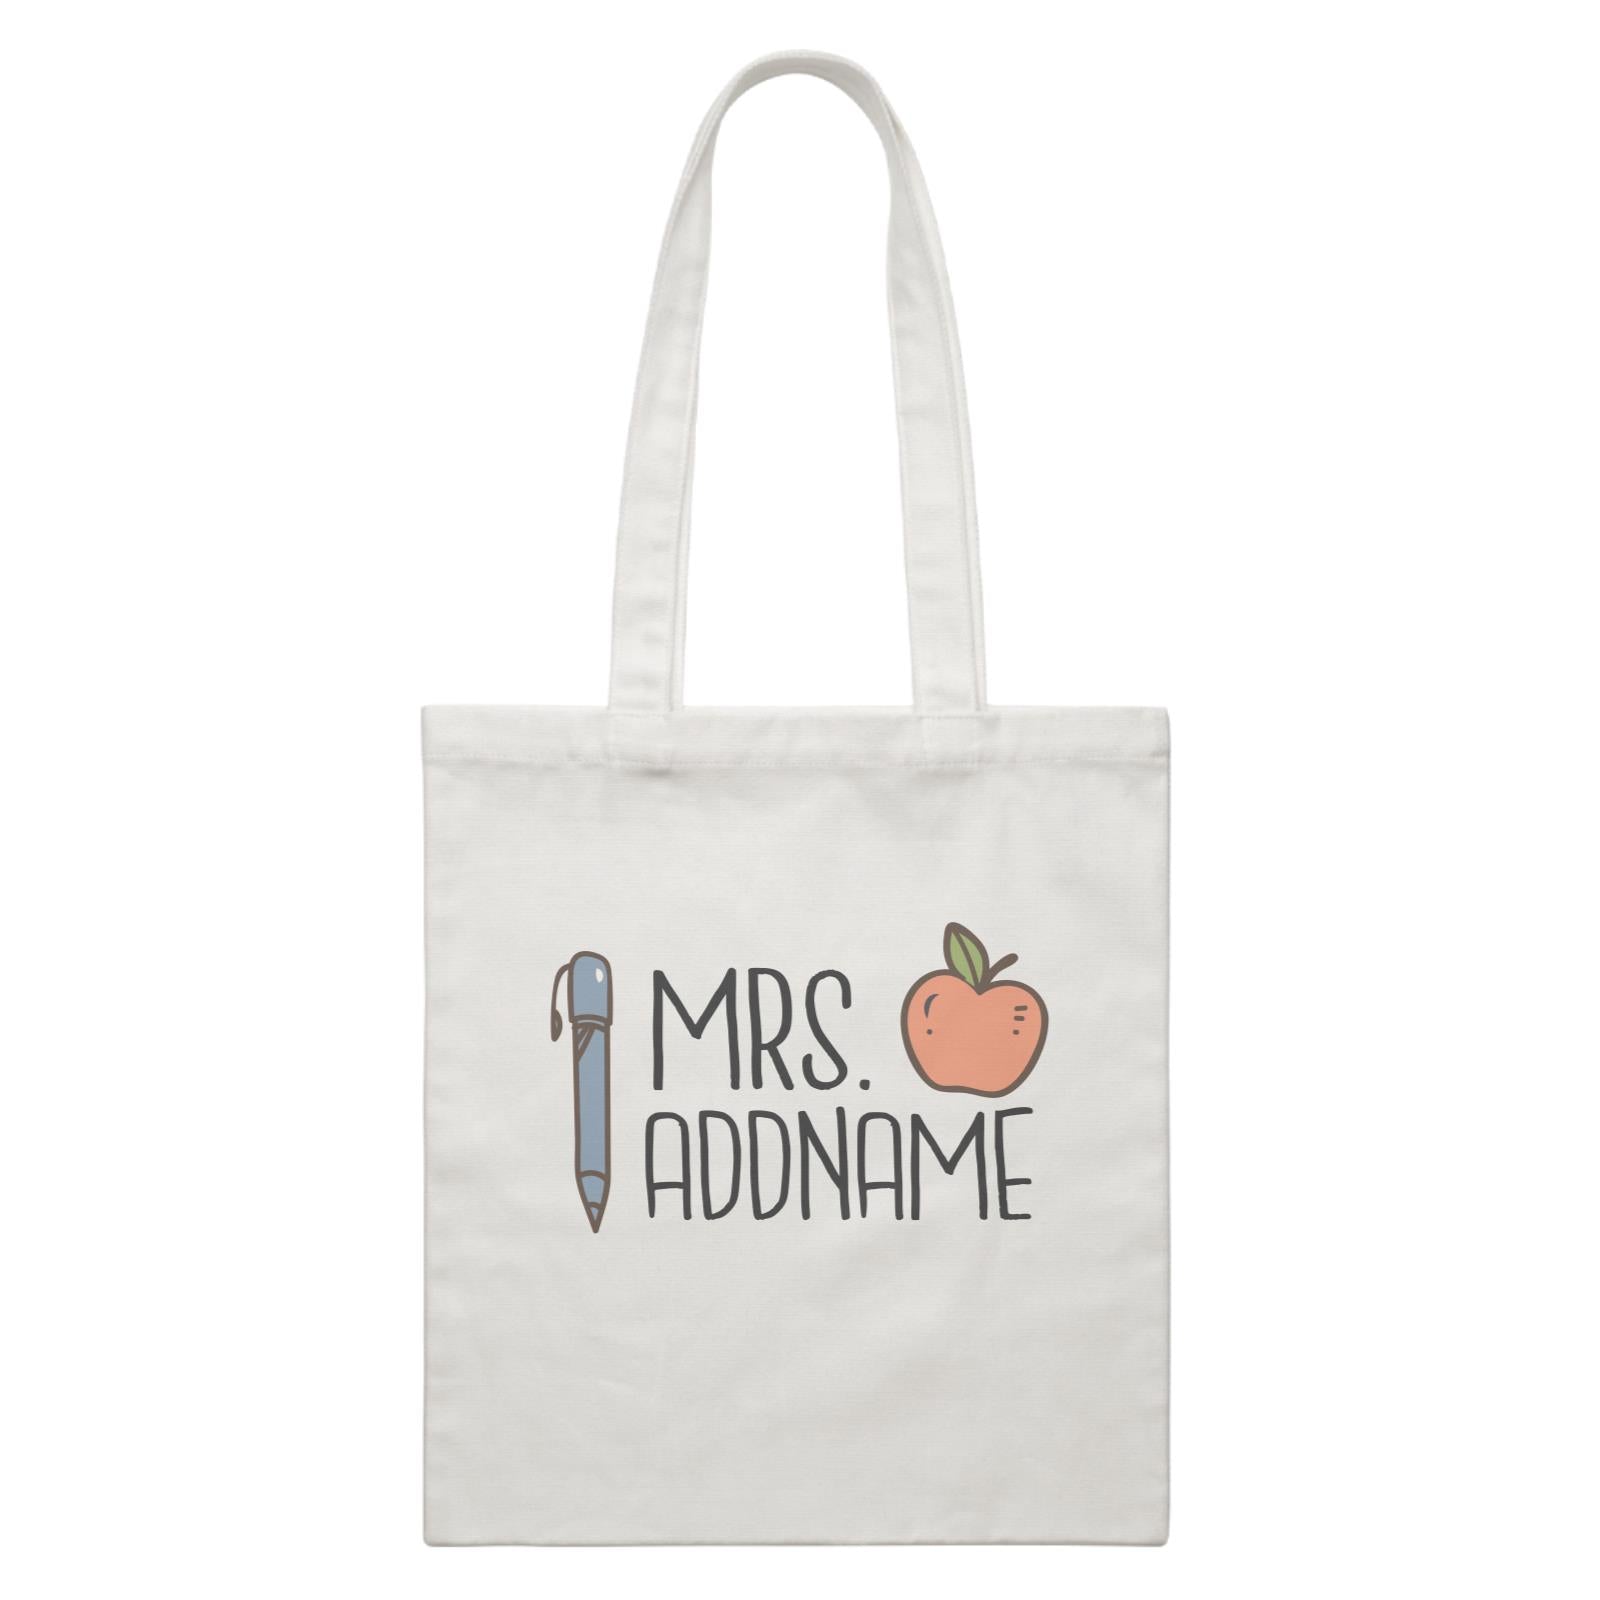 Teacher Addname Apple And Pen Mrs Addname White Canvas Bag